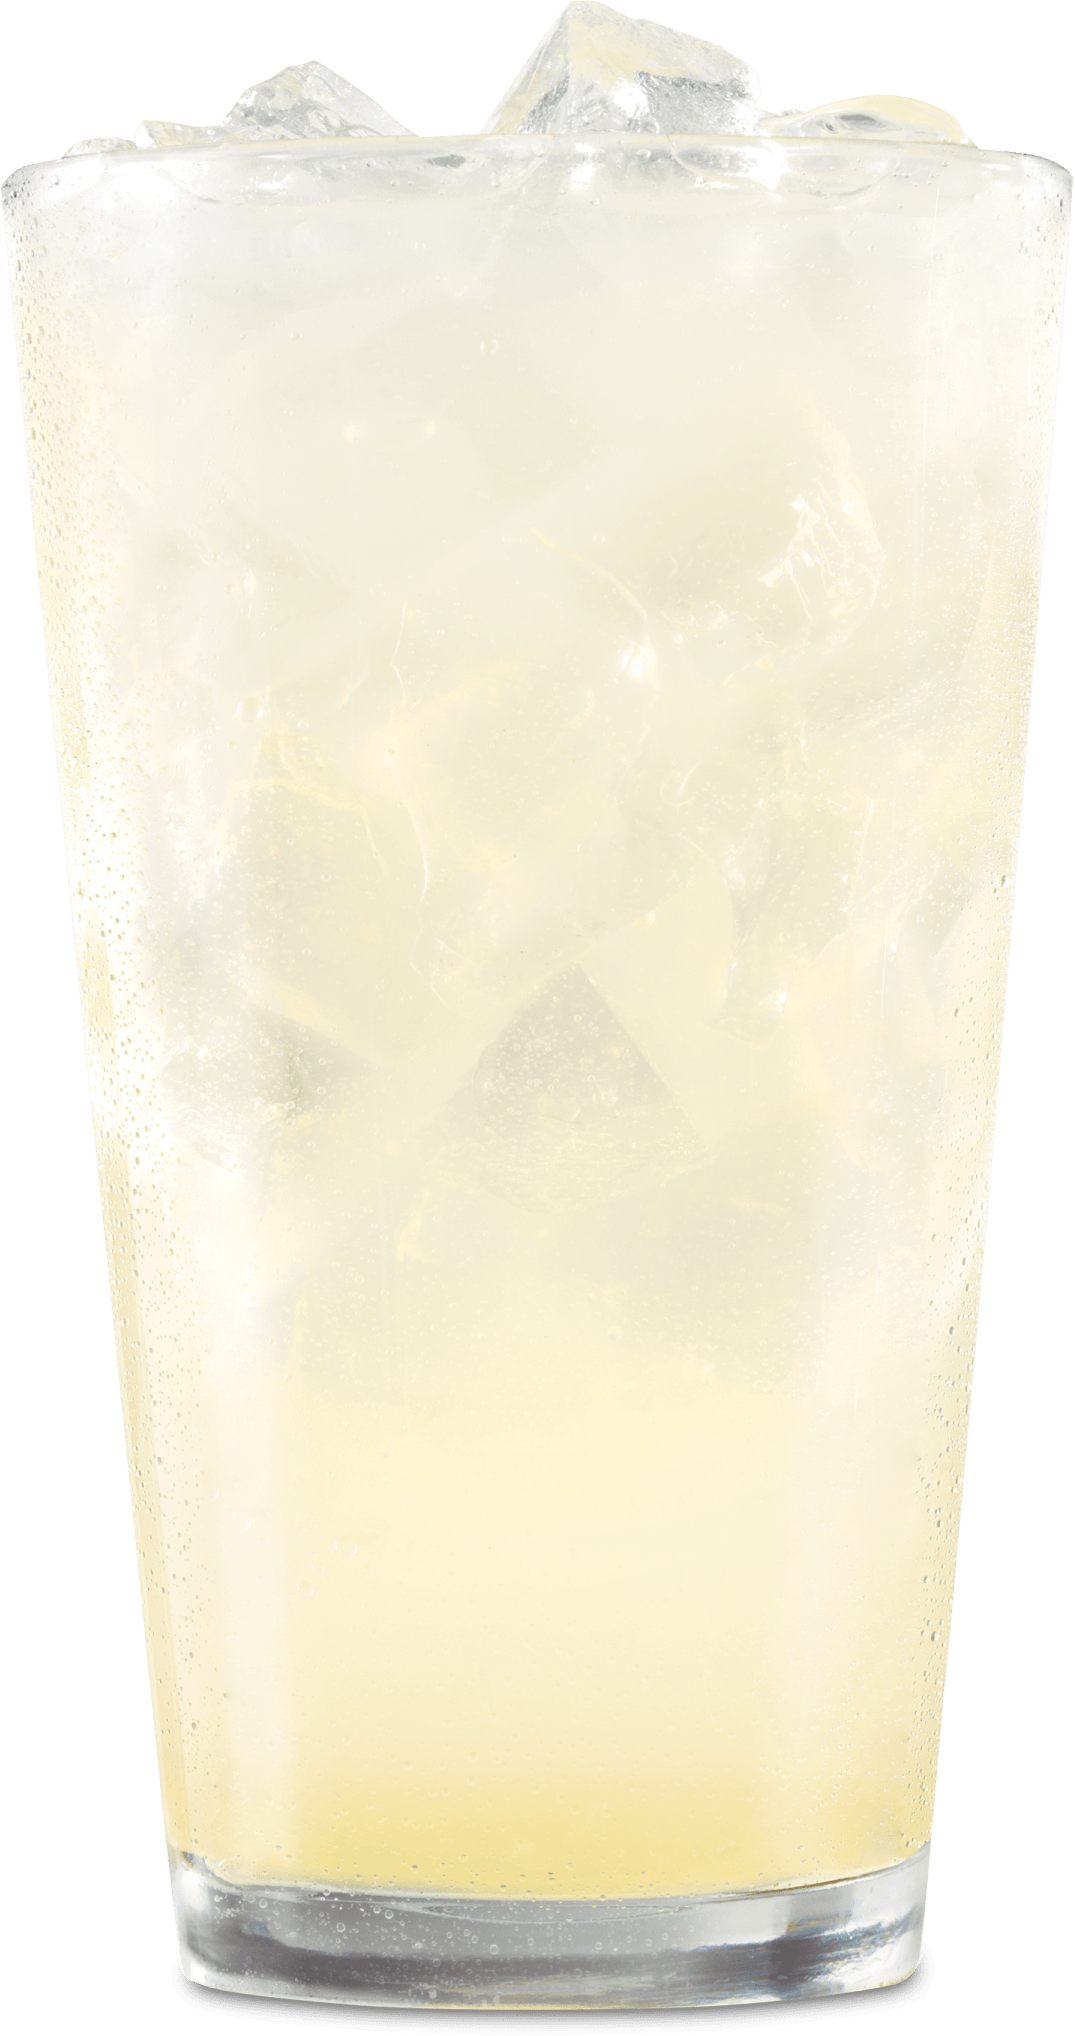 Arby's Large Classic Lemonade Nutrition Facts